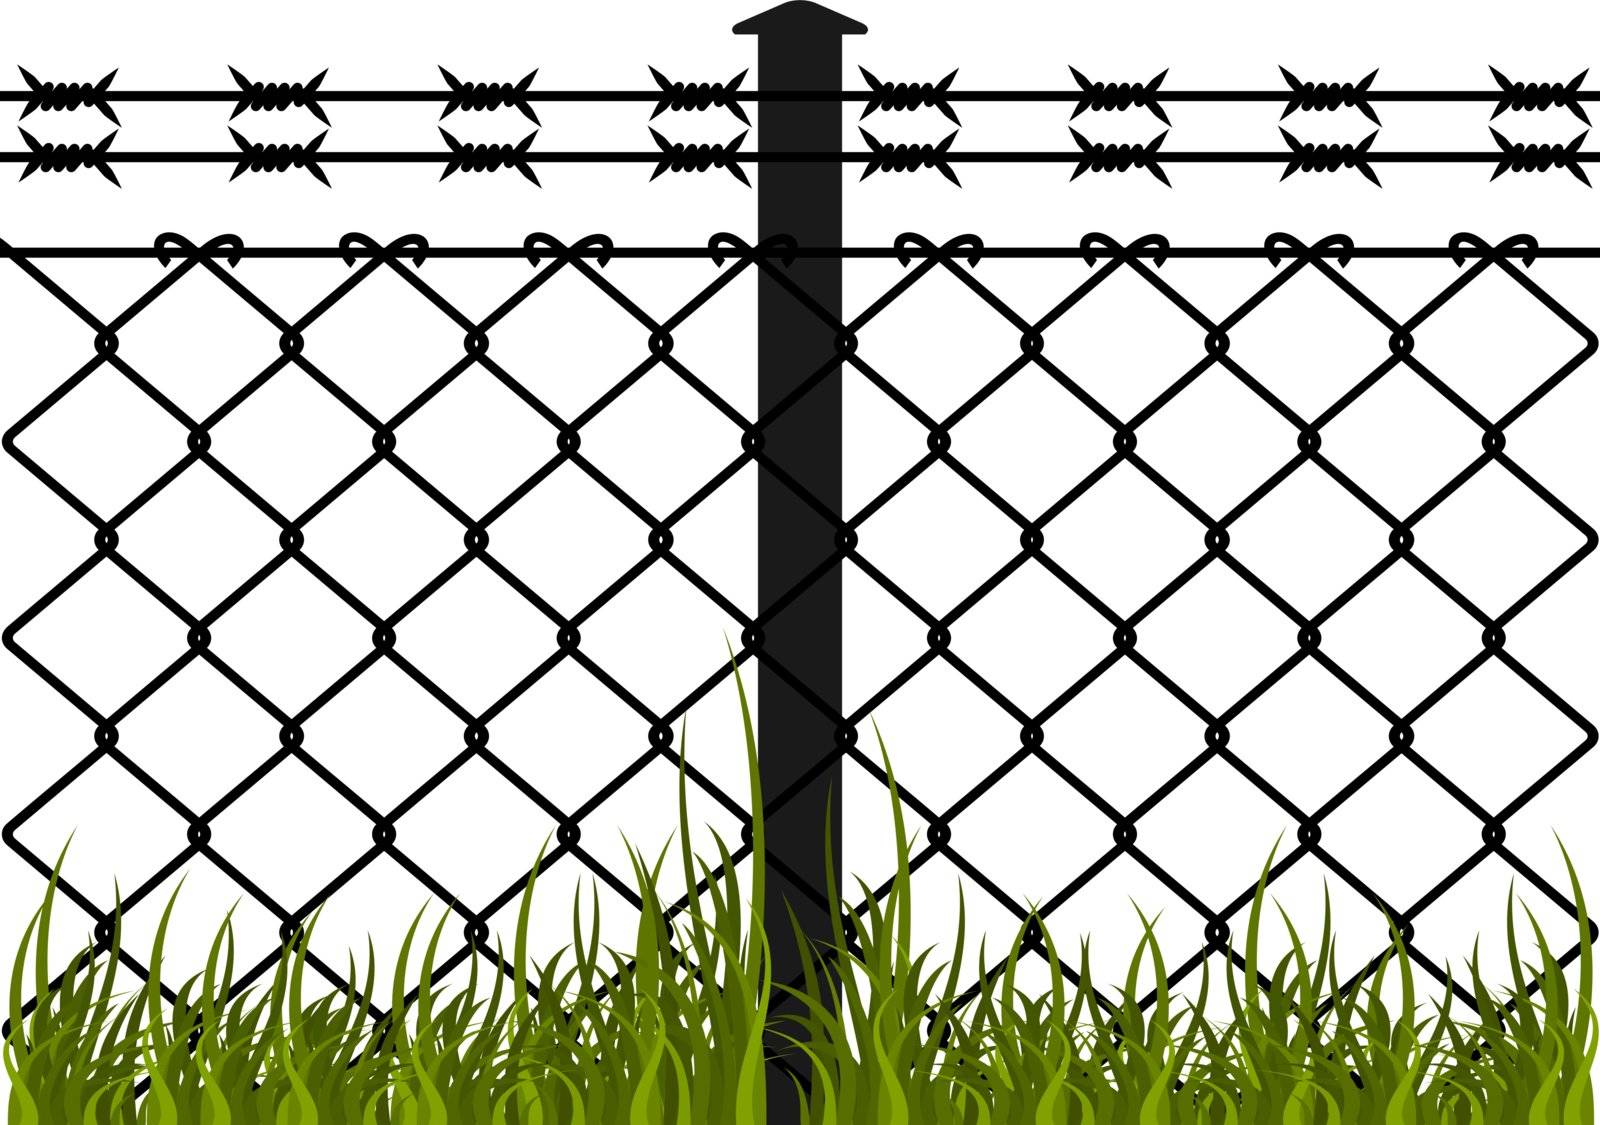 Wire fence with barbed wires. Vector illustration